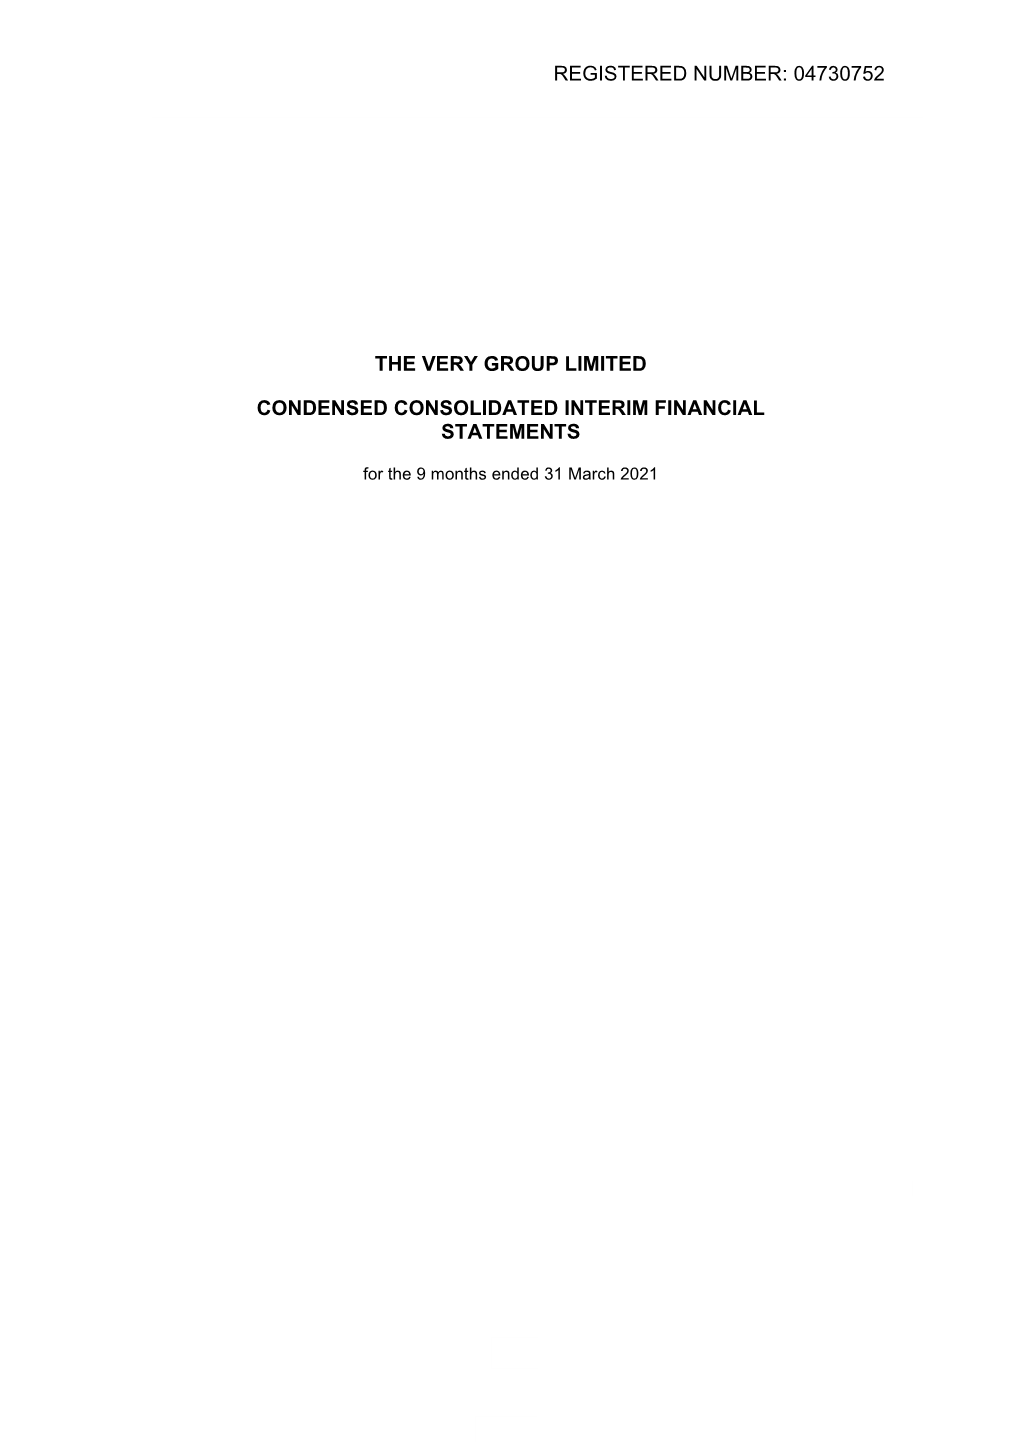 04730752 the Very Group Limited Condensed Consolidated Interim Financial Statements